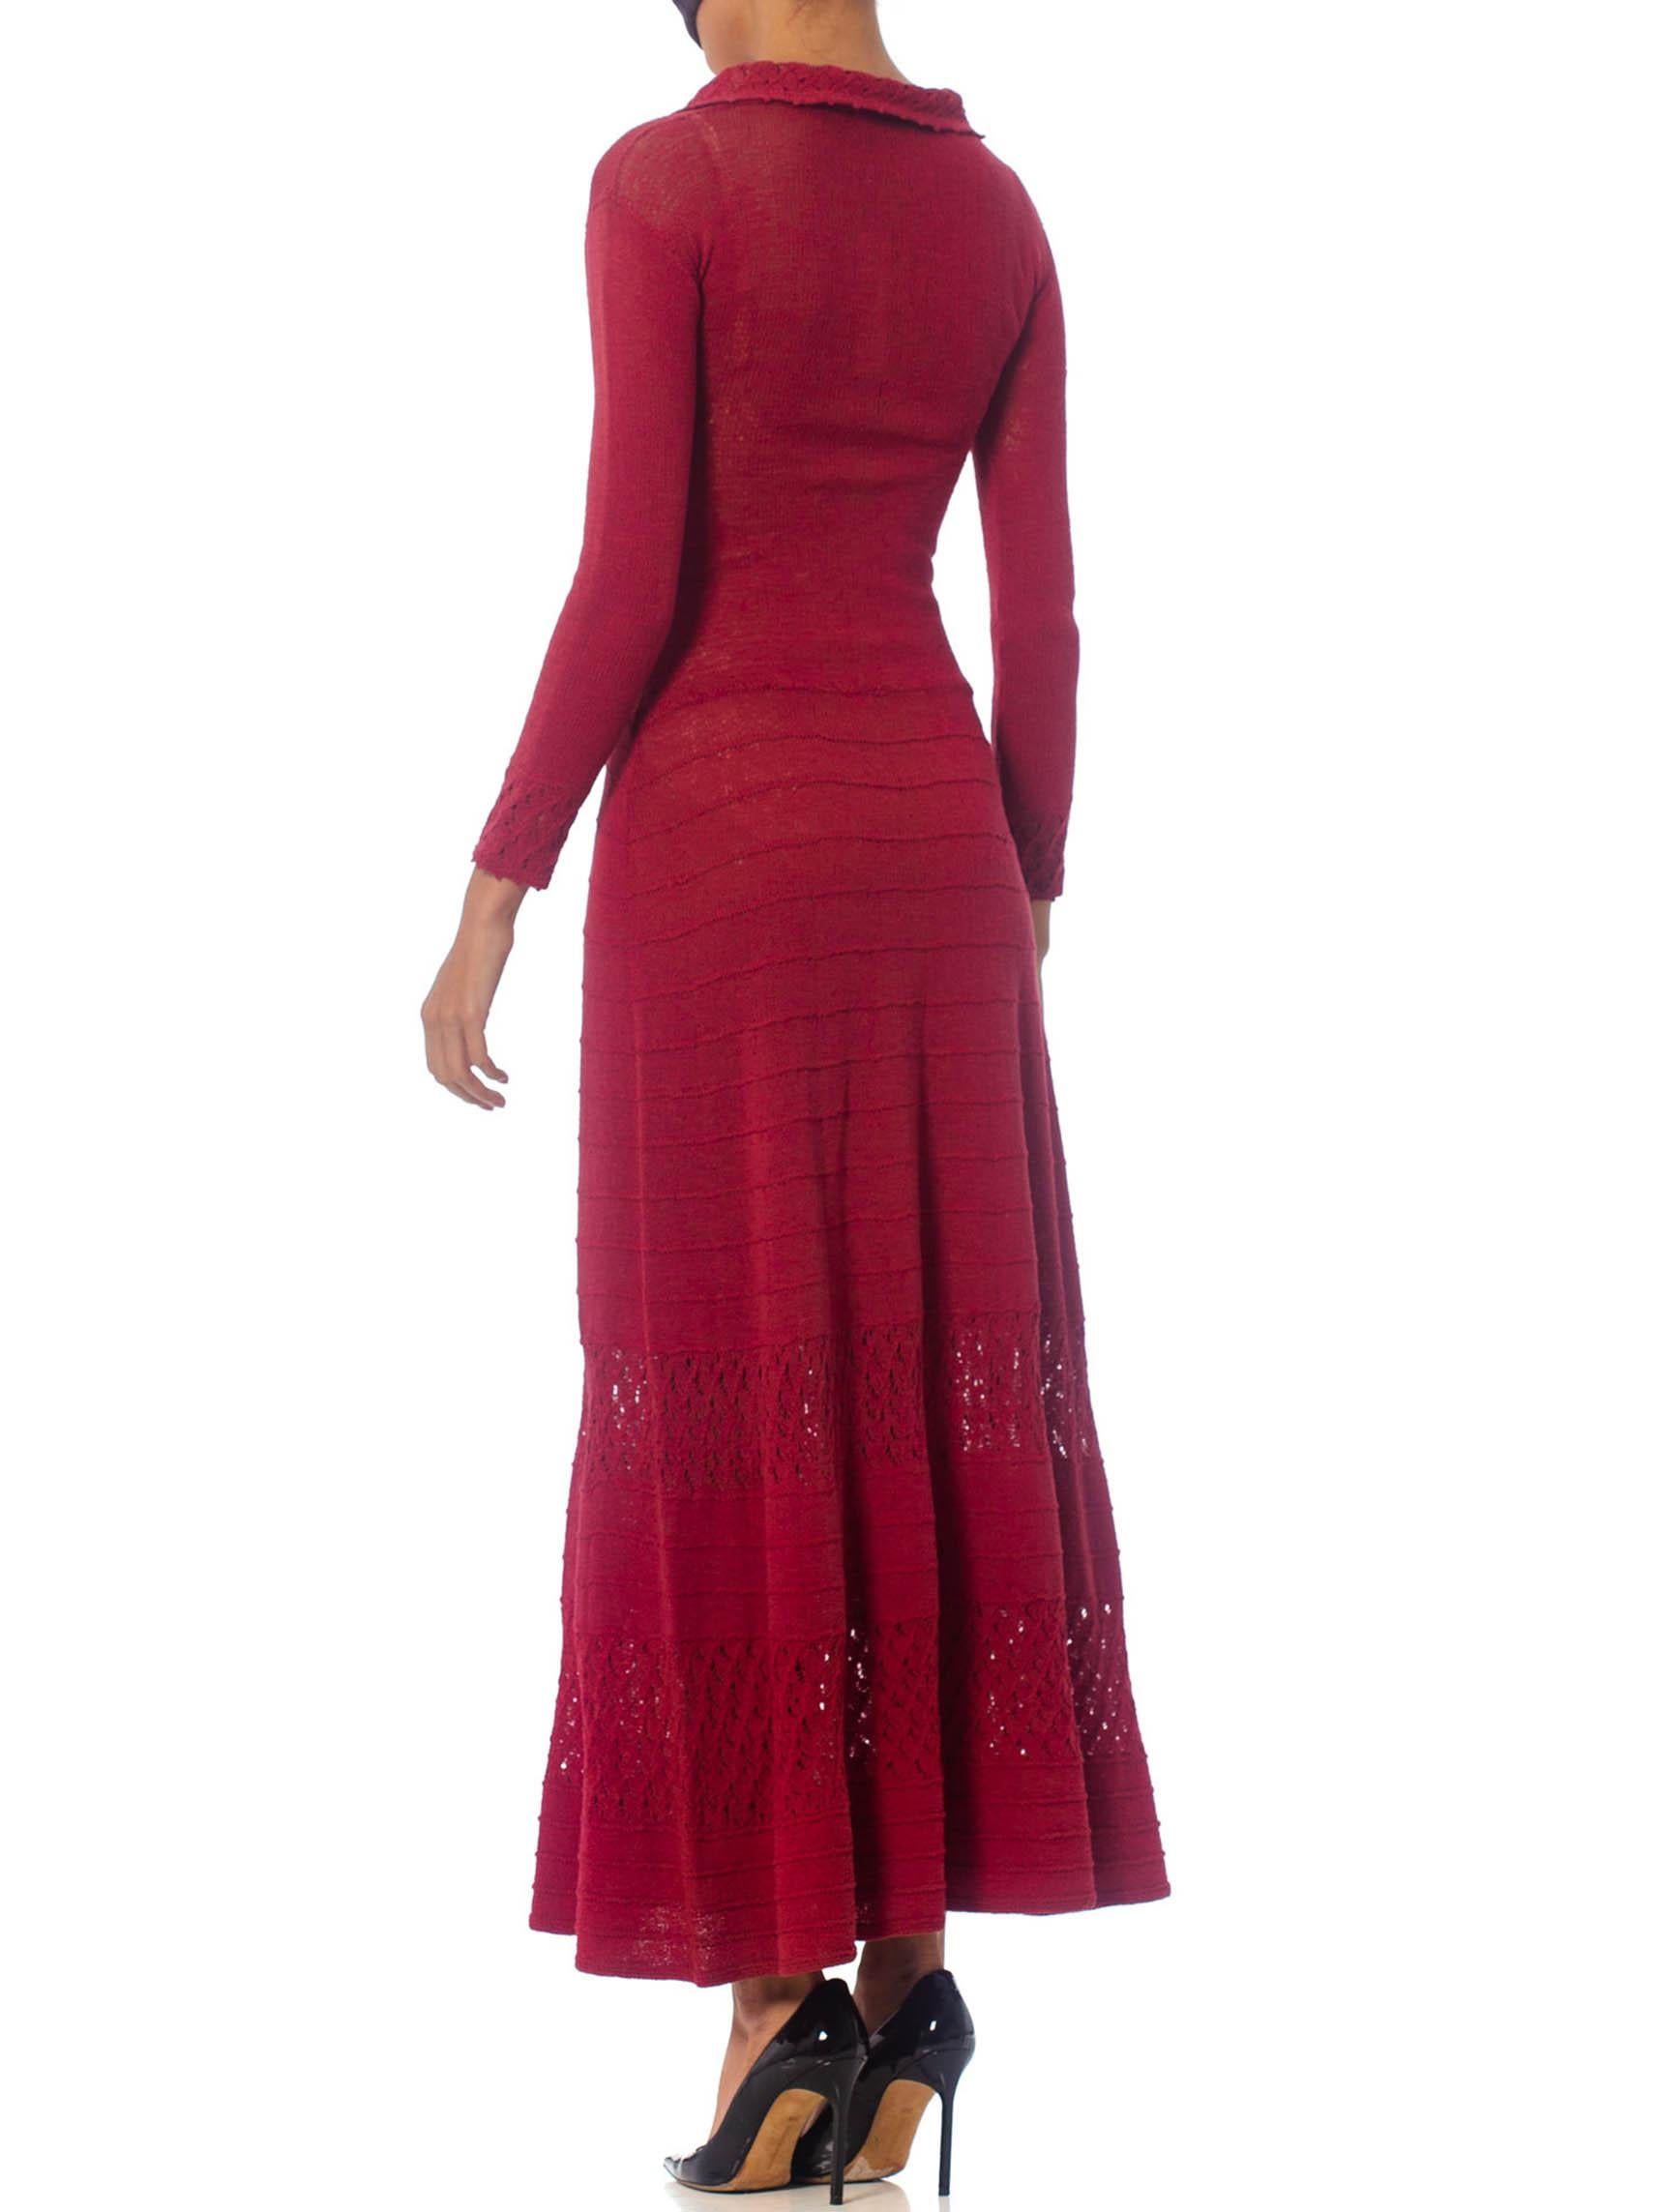 Women's 1930S Cranberry Red Rare Rayon Blend Knit Maxi Dress With Sleeves For Sale